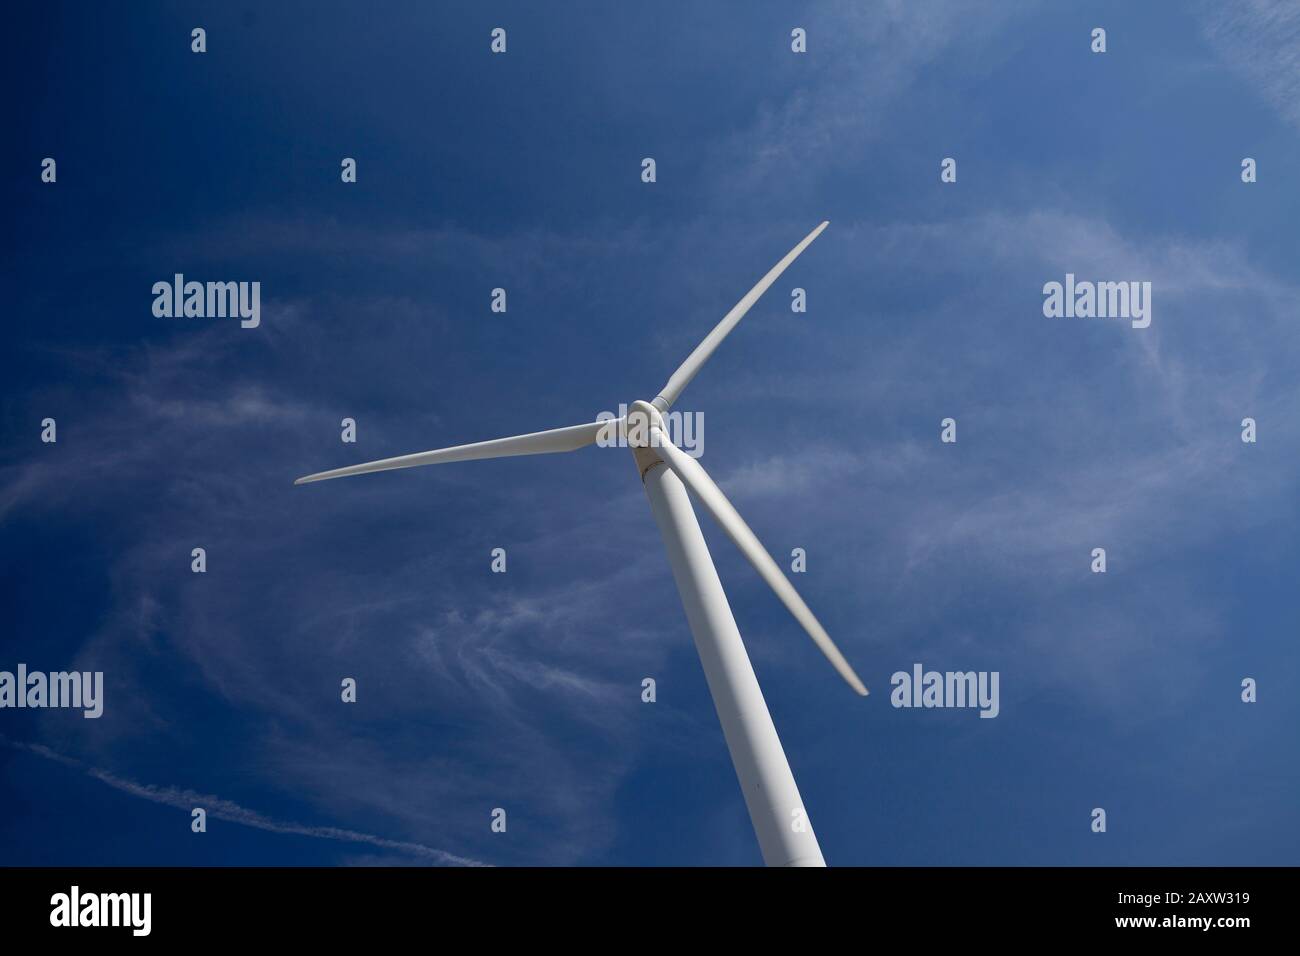 White wind turbine against a perfect blue sky little fluffy white clouds Stock Photo